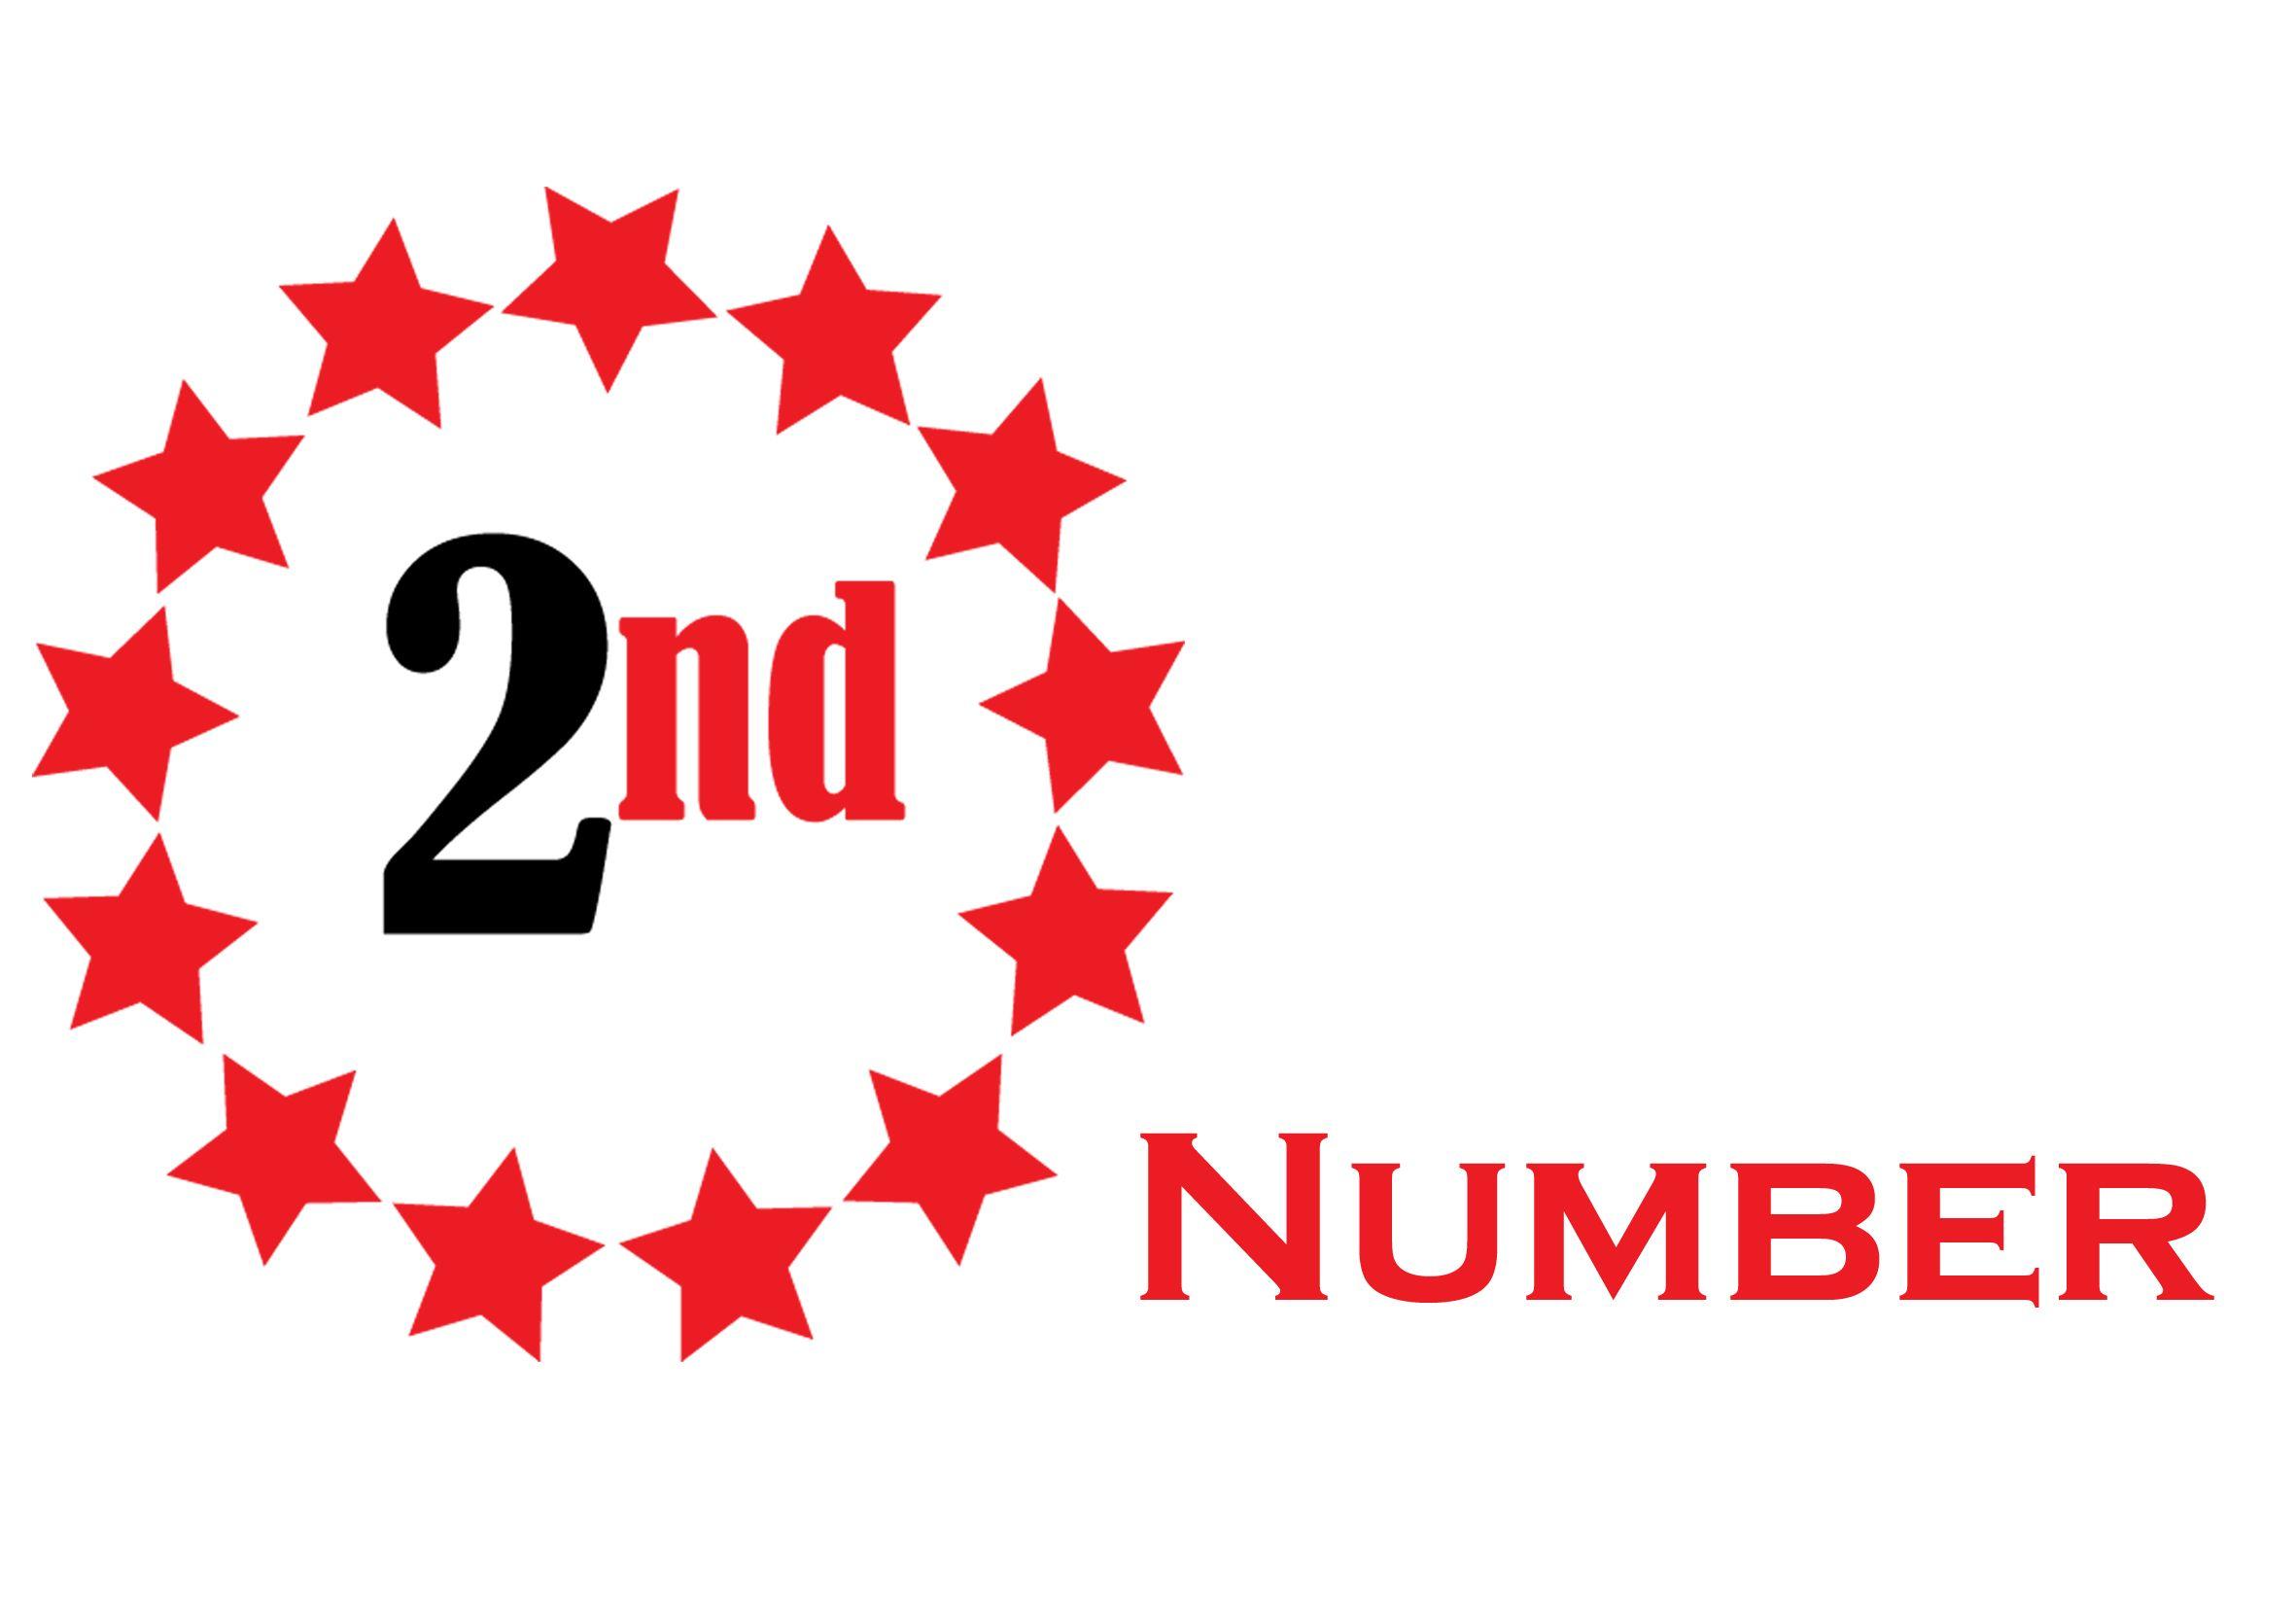 2nd Logo - One Mobile, Many Numbers – The UK Launch of '2nd Number'